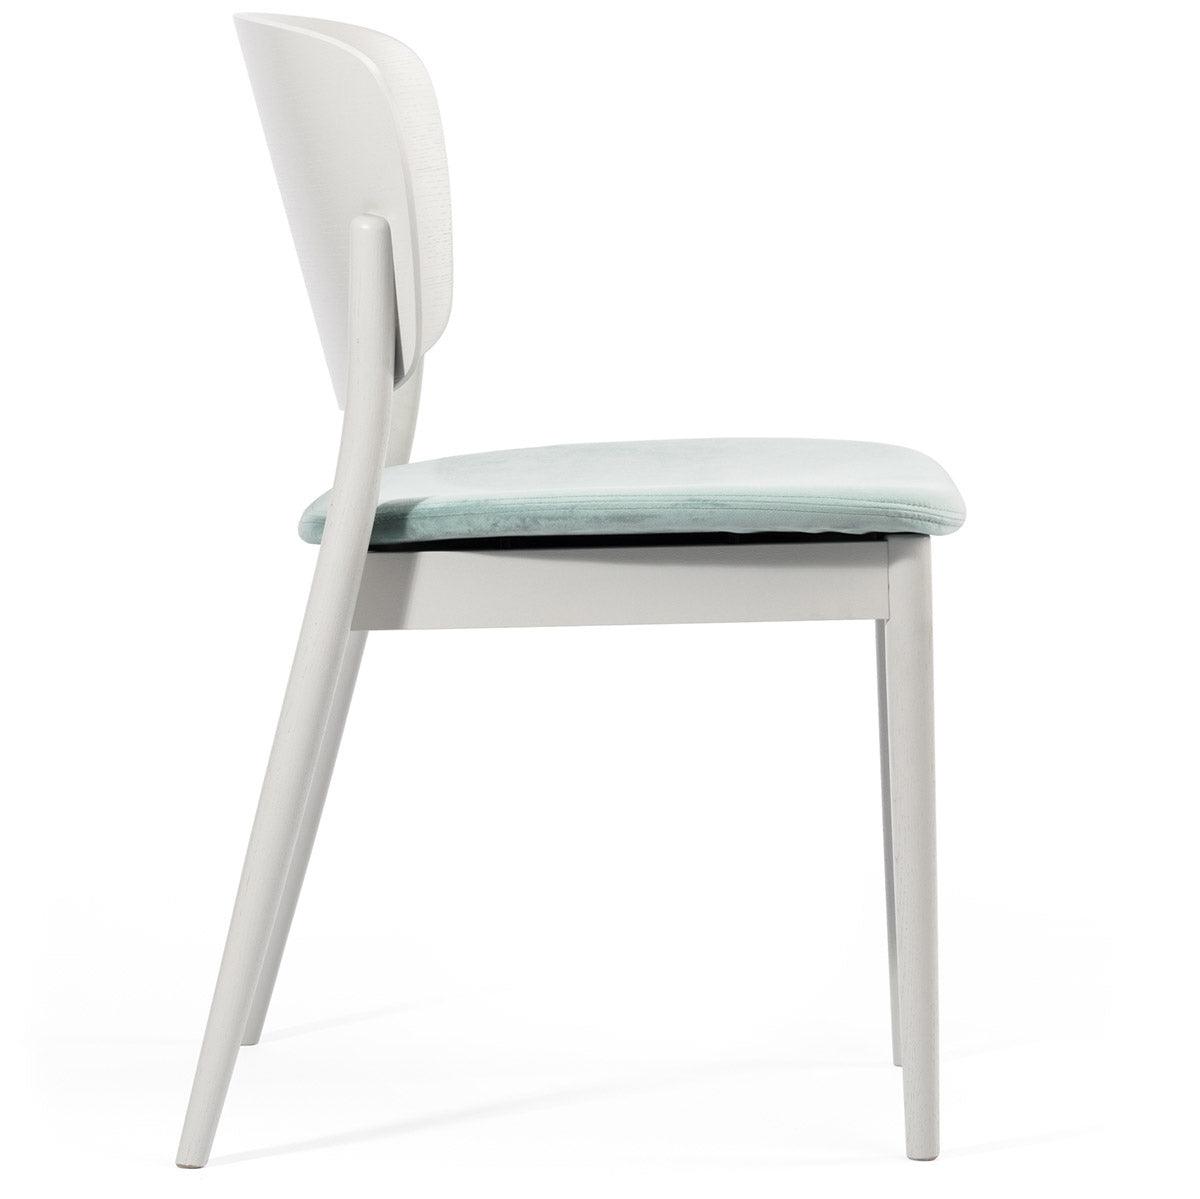 Valencia Upholstered/Wood Chair - WOO .Design